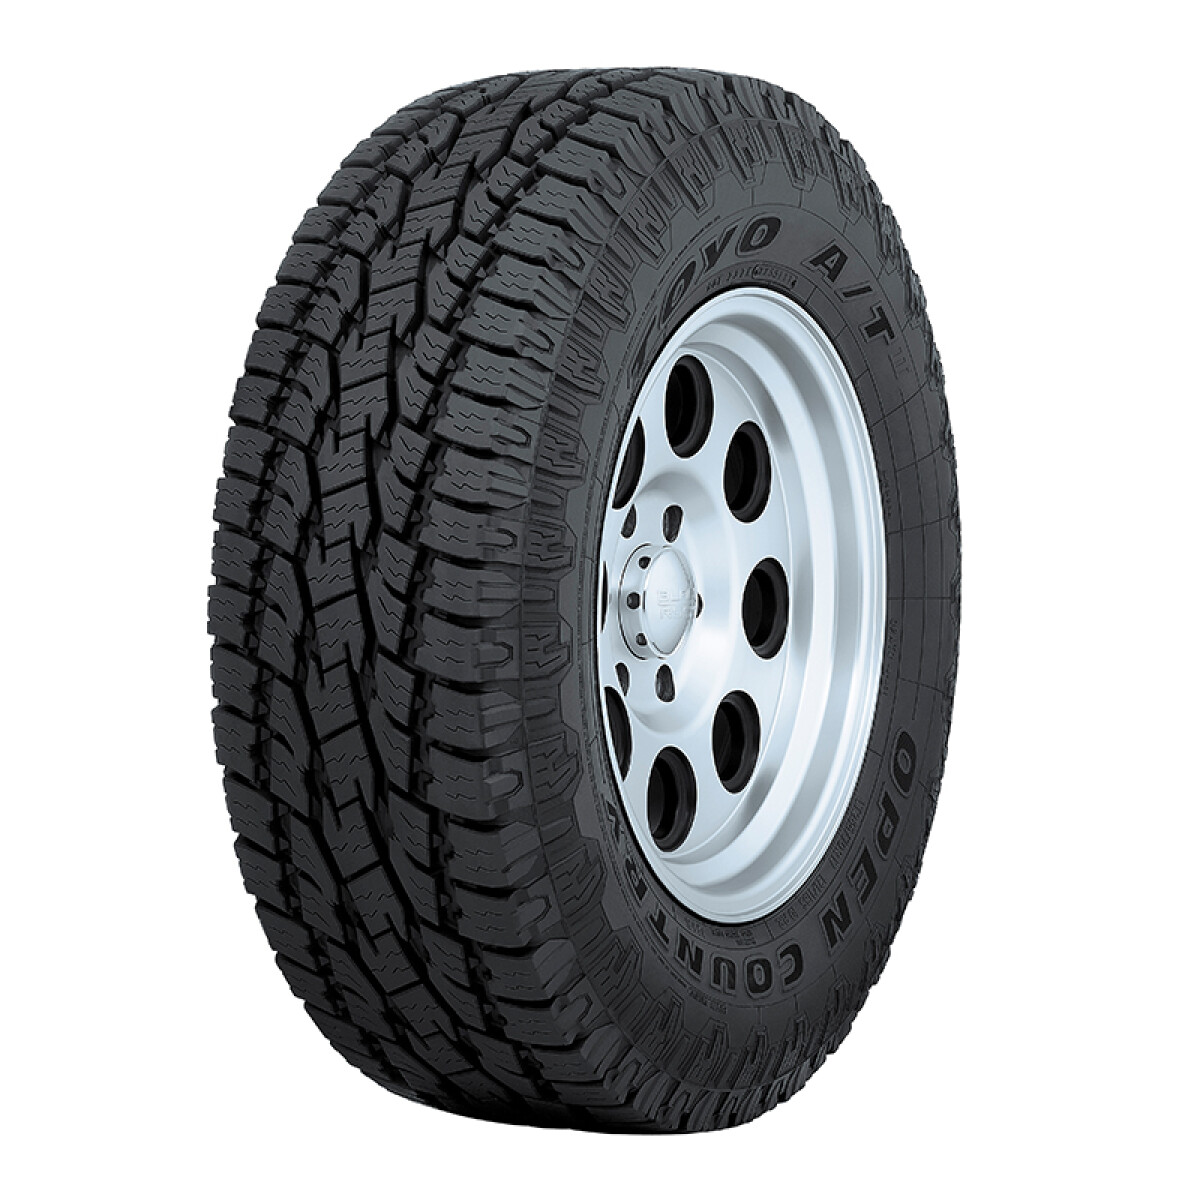 CUBIERTA NEUMATICO TOYO OPEN COUNTRY AT2 LT265/65R17 120/117R 